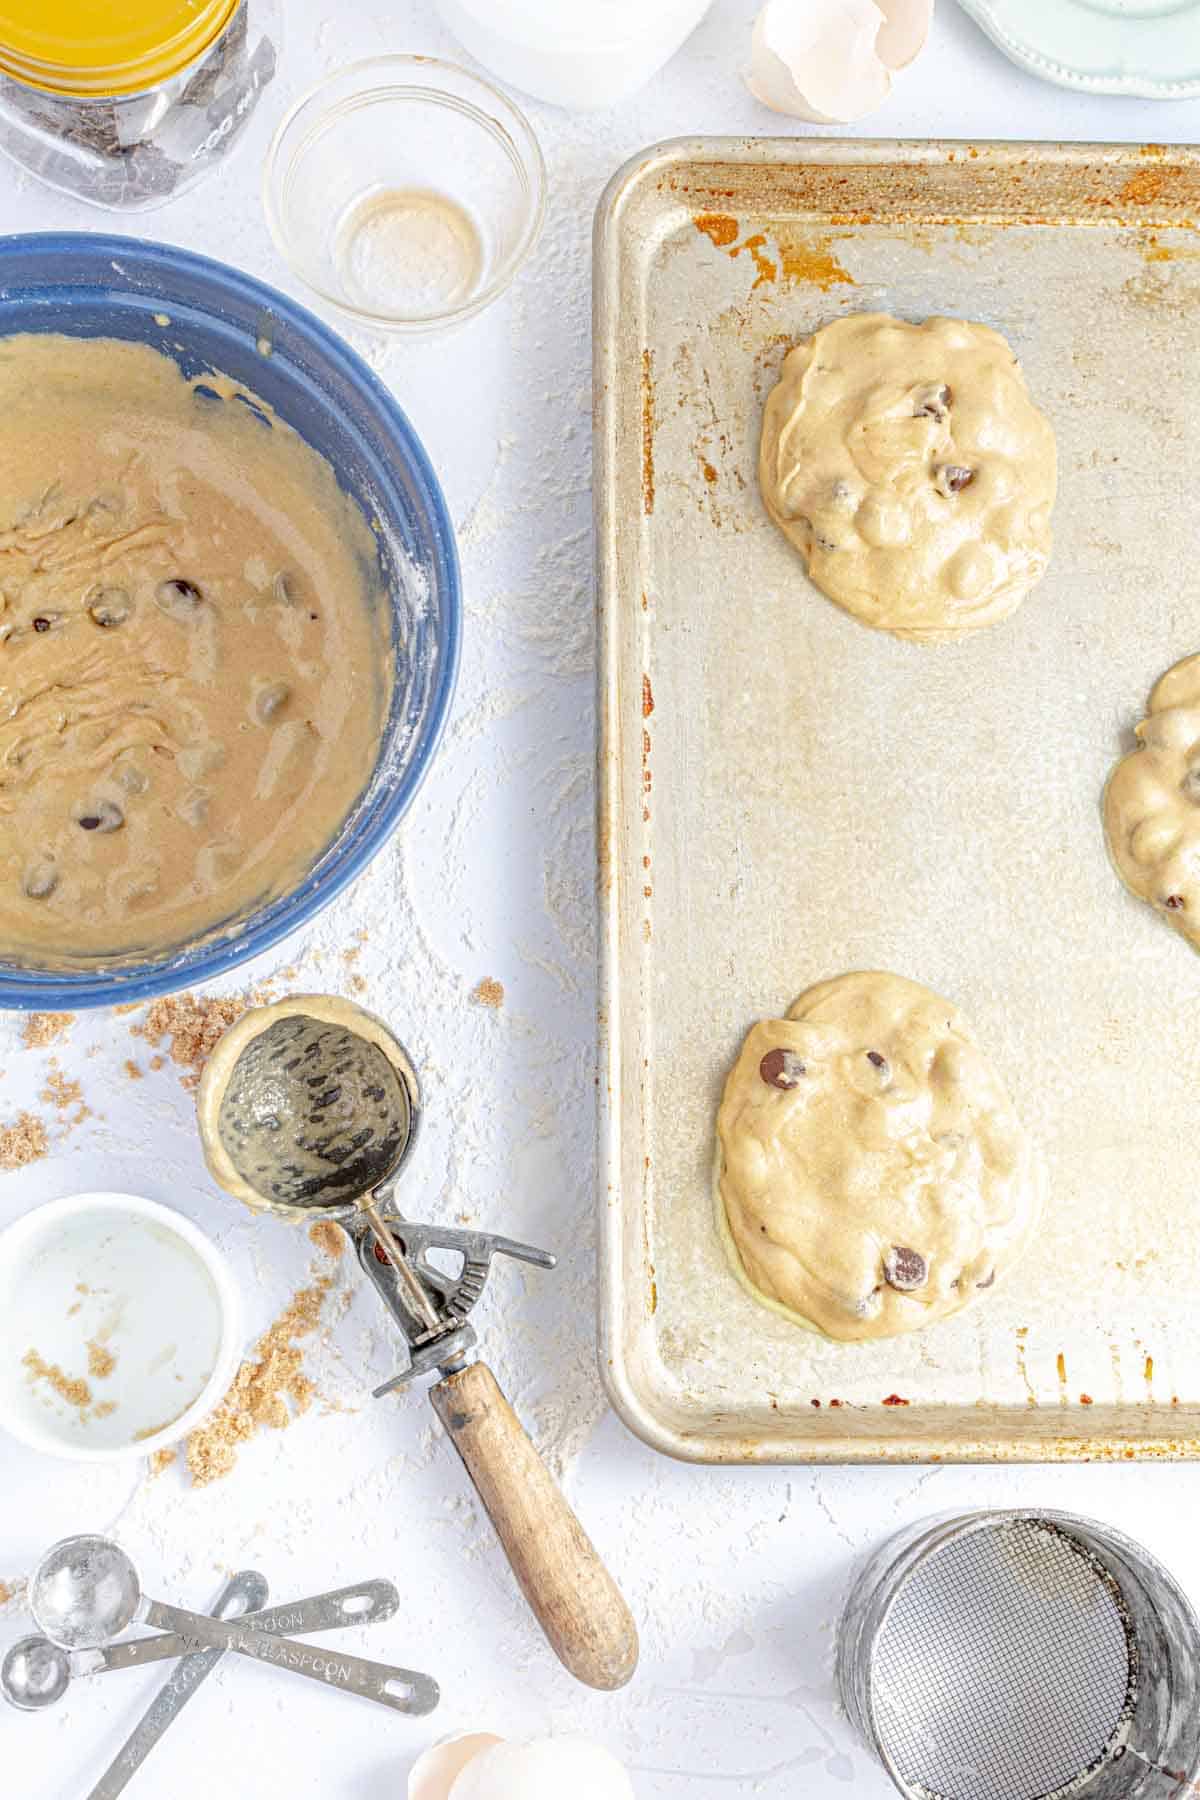 Raw Gluten-Free Cookie Dough on a Greased Baking Pan Beside an Ice Cream Scoop